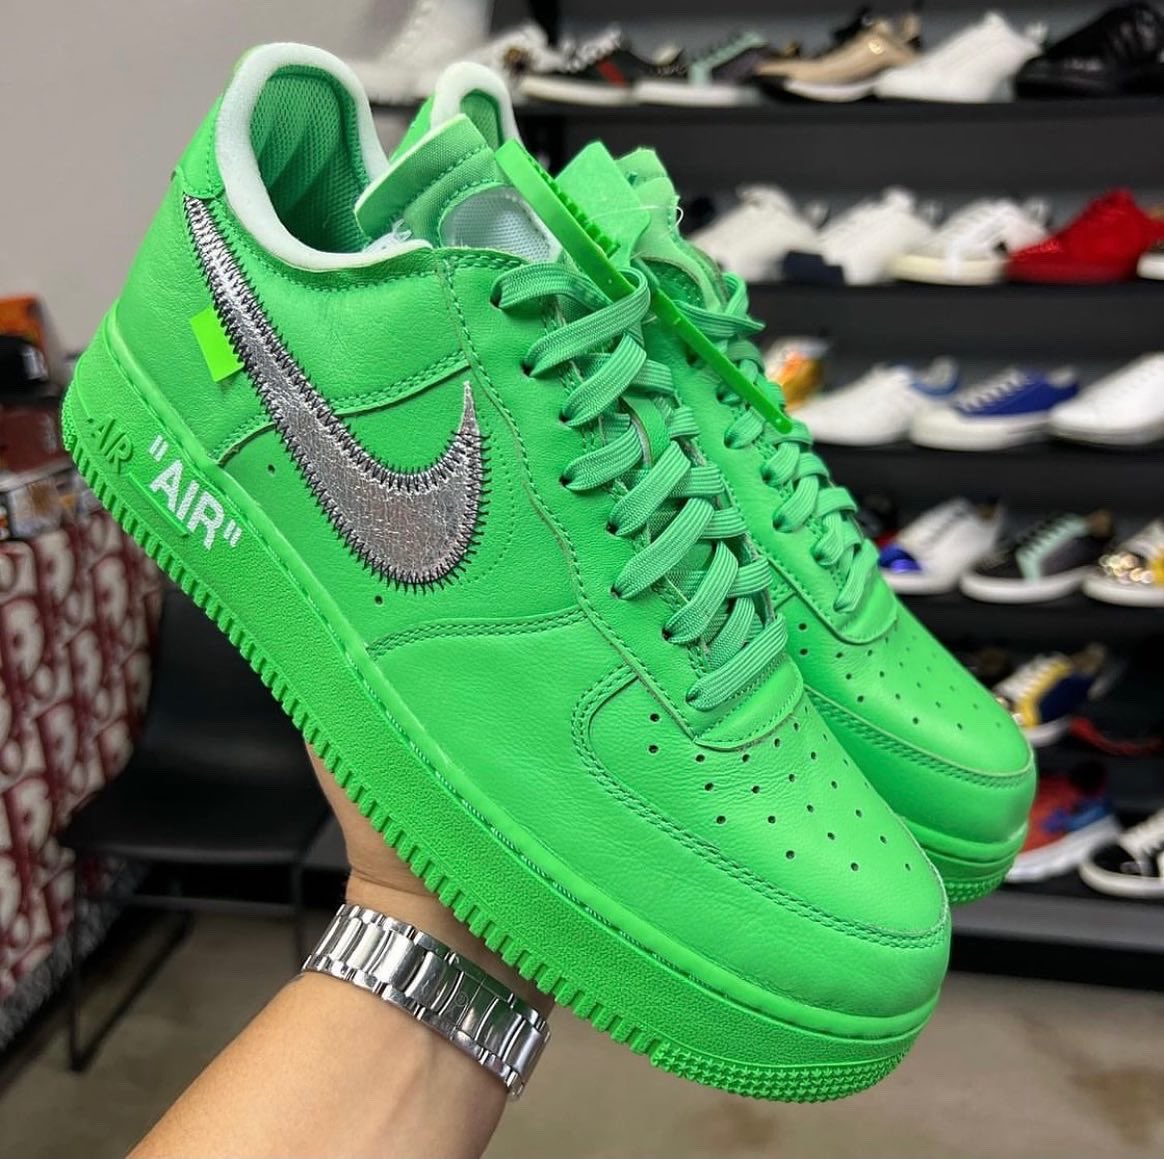 Sneaker Shouts™ on X: Release Reminder 🗓 Off-White x Nike Air Force 1 Low  Green Spark drops at 10am EST. (9/13) BUY HERE:    / X